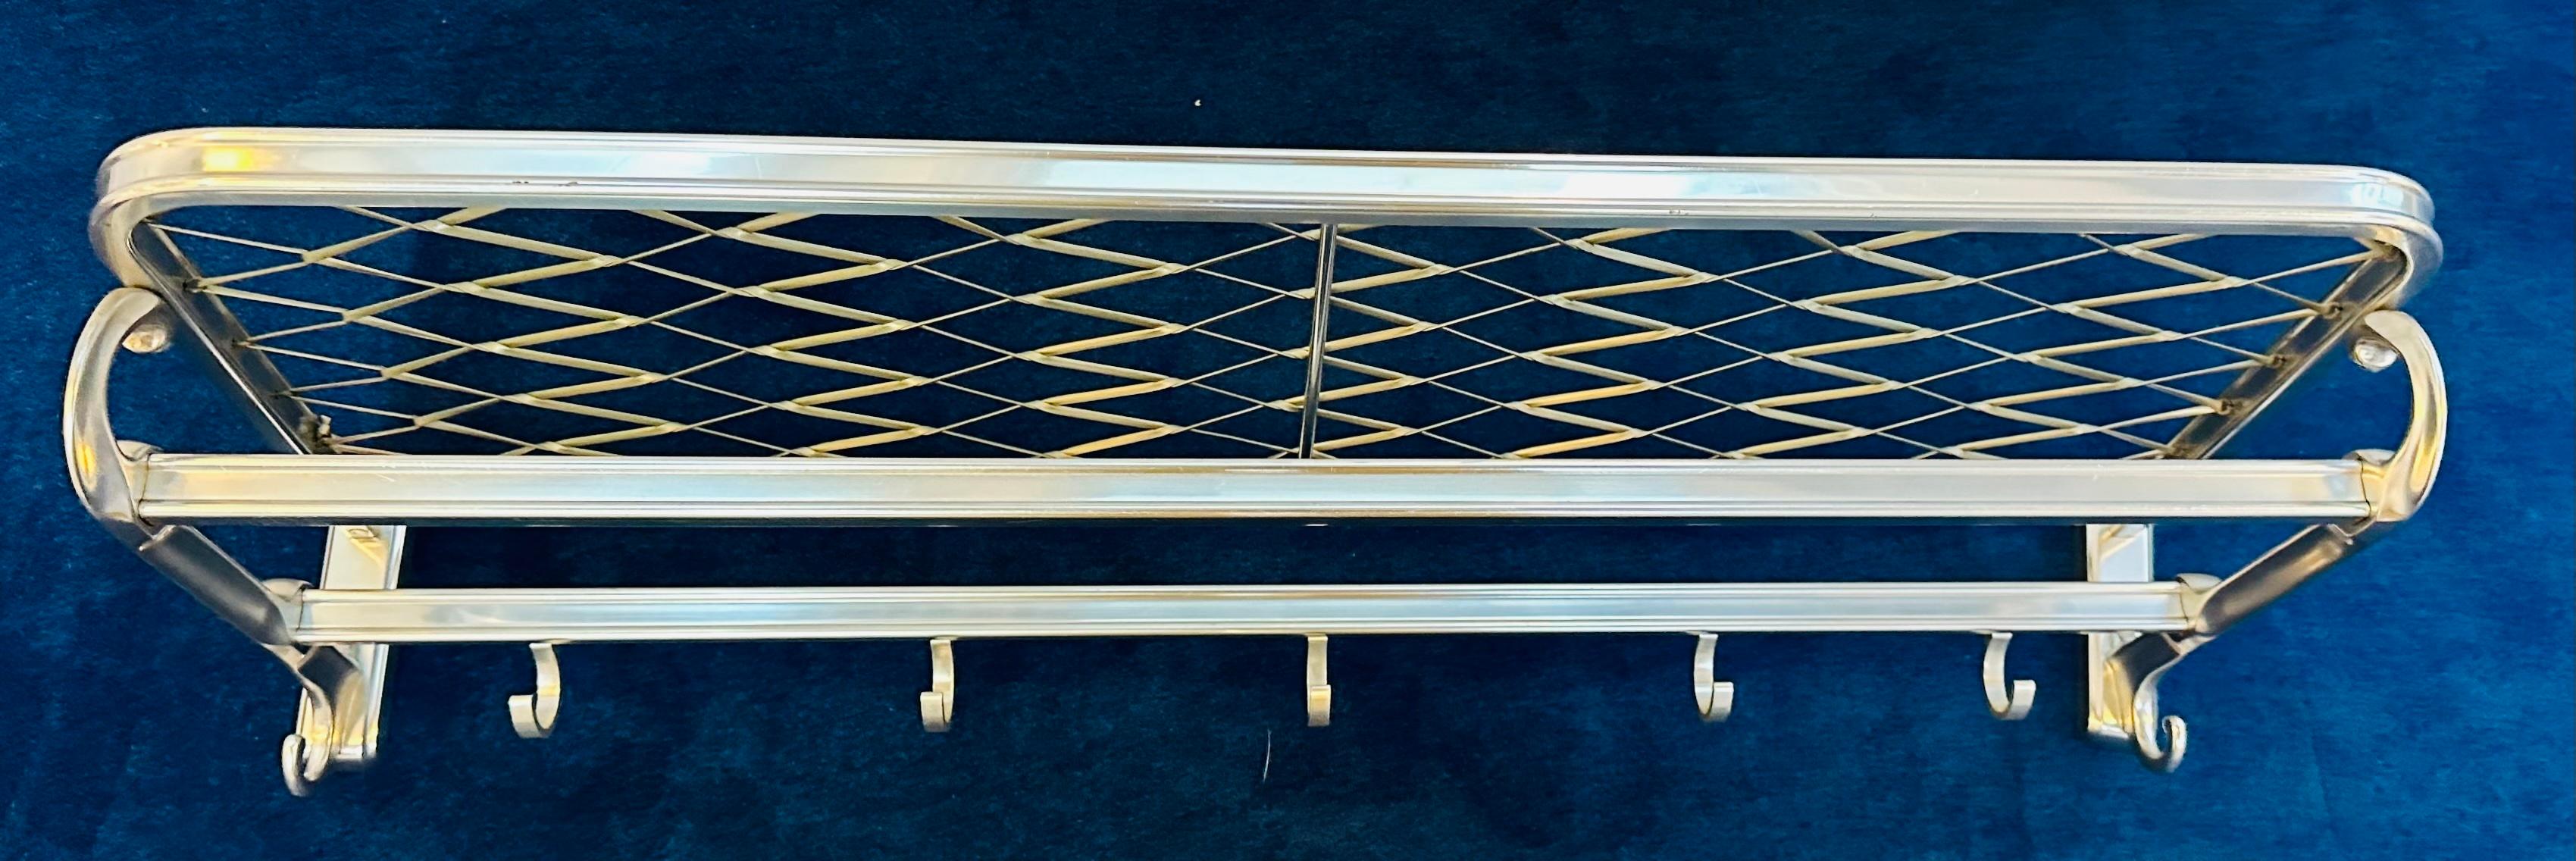 Dyed 1960s Vintage German Aluminium Silver Train Wall Hanging Coat Hat Luggage Rack For Sale